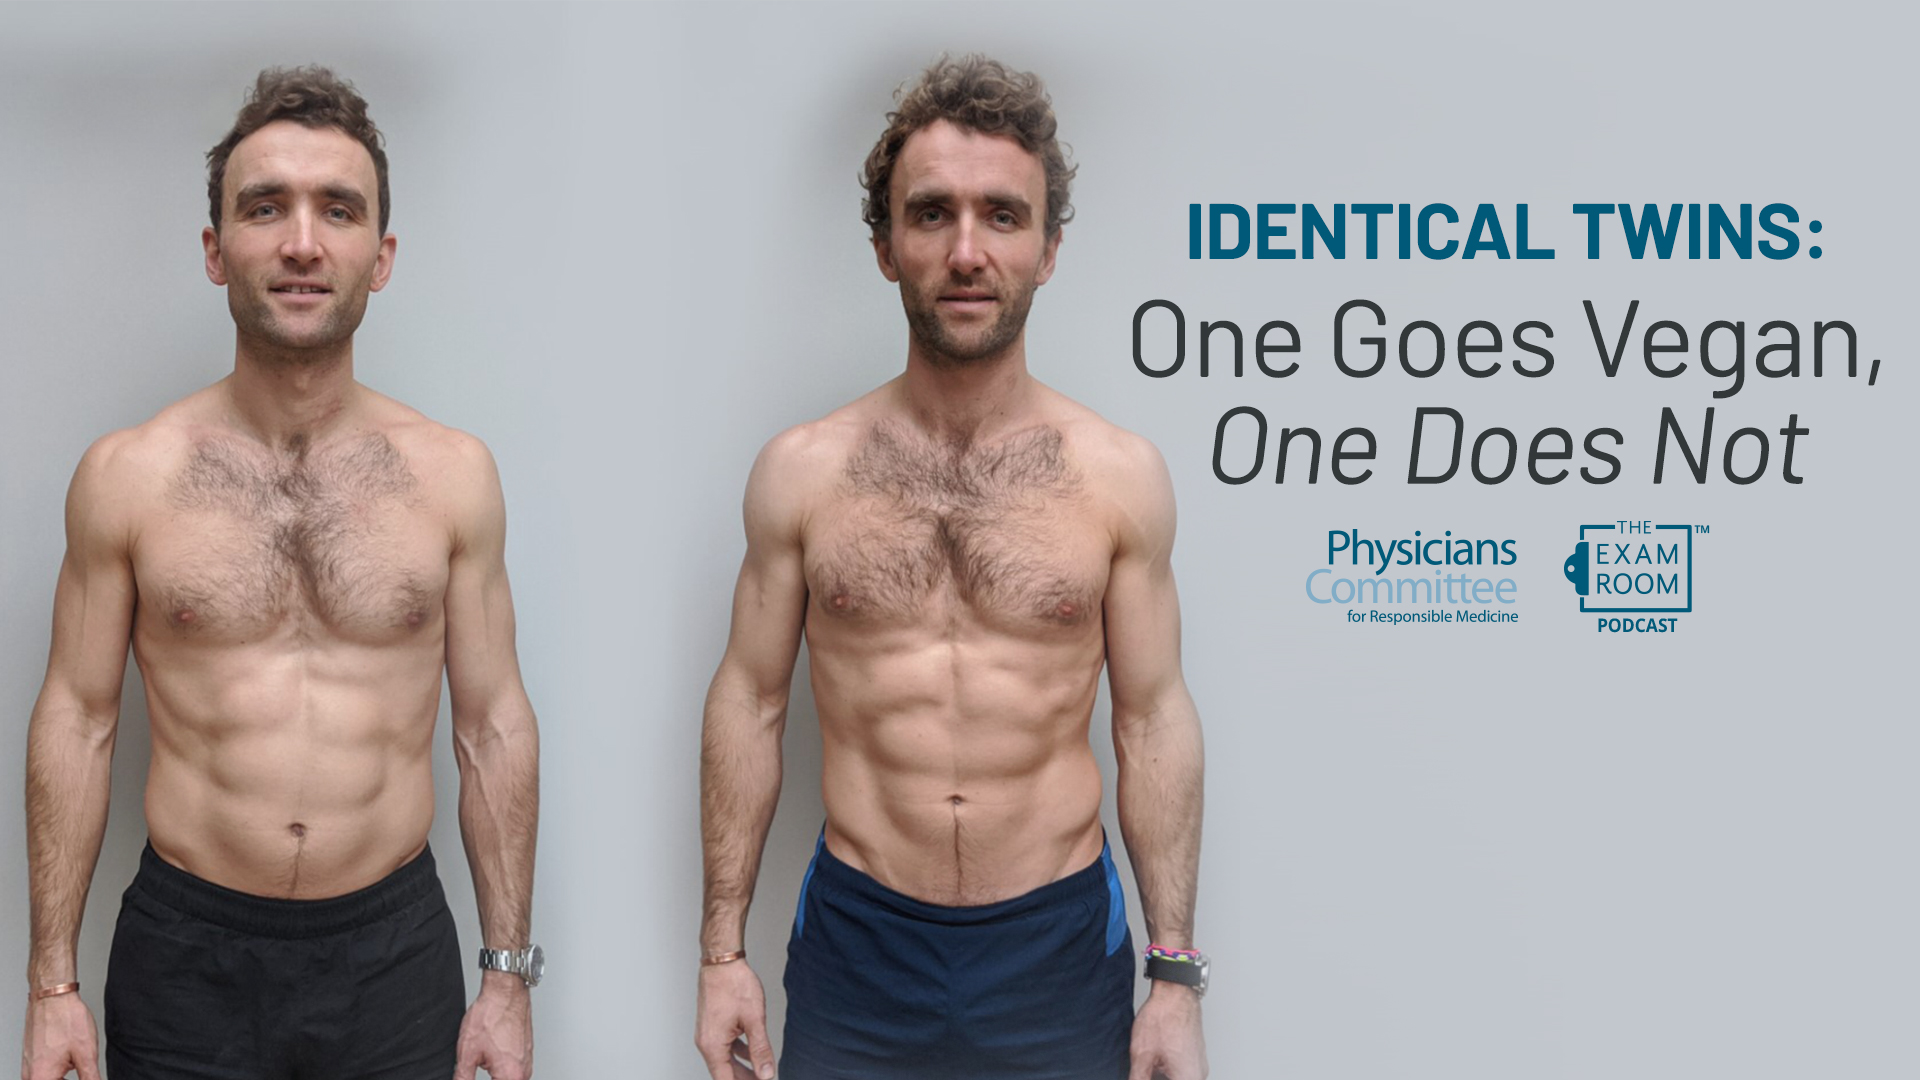 Identical Twins: One Goes Vegan, One Does Not